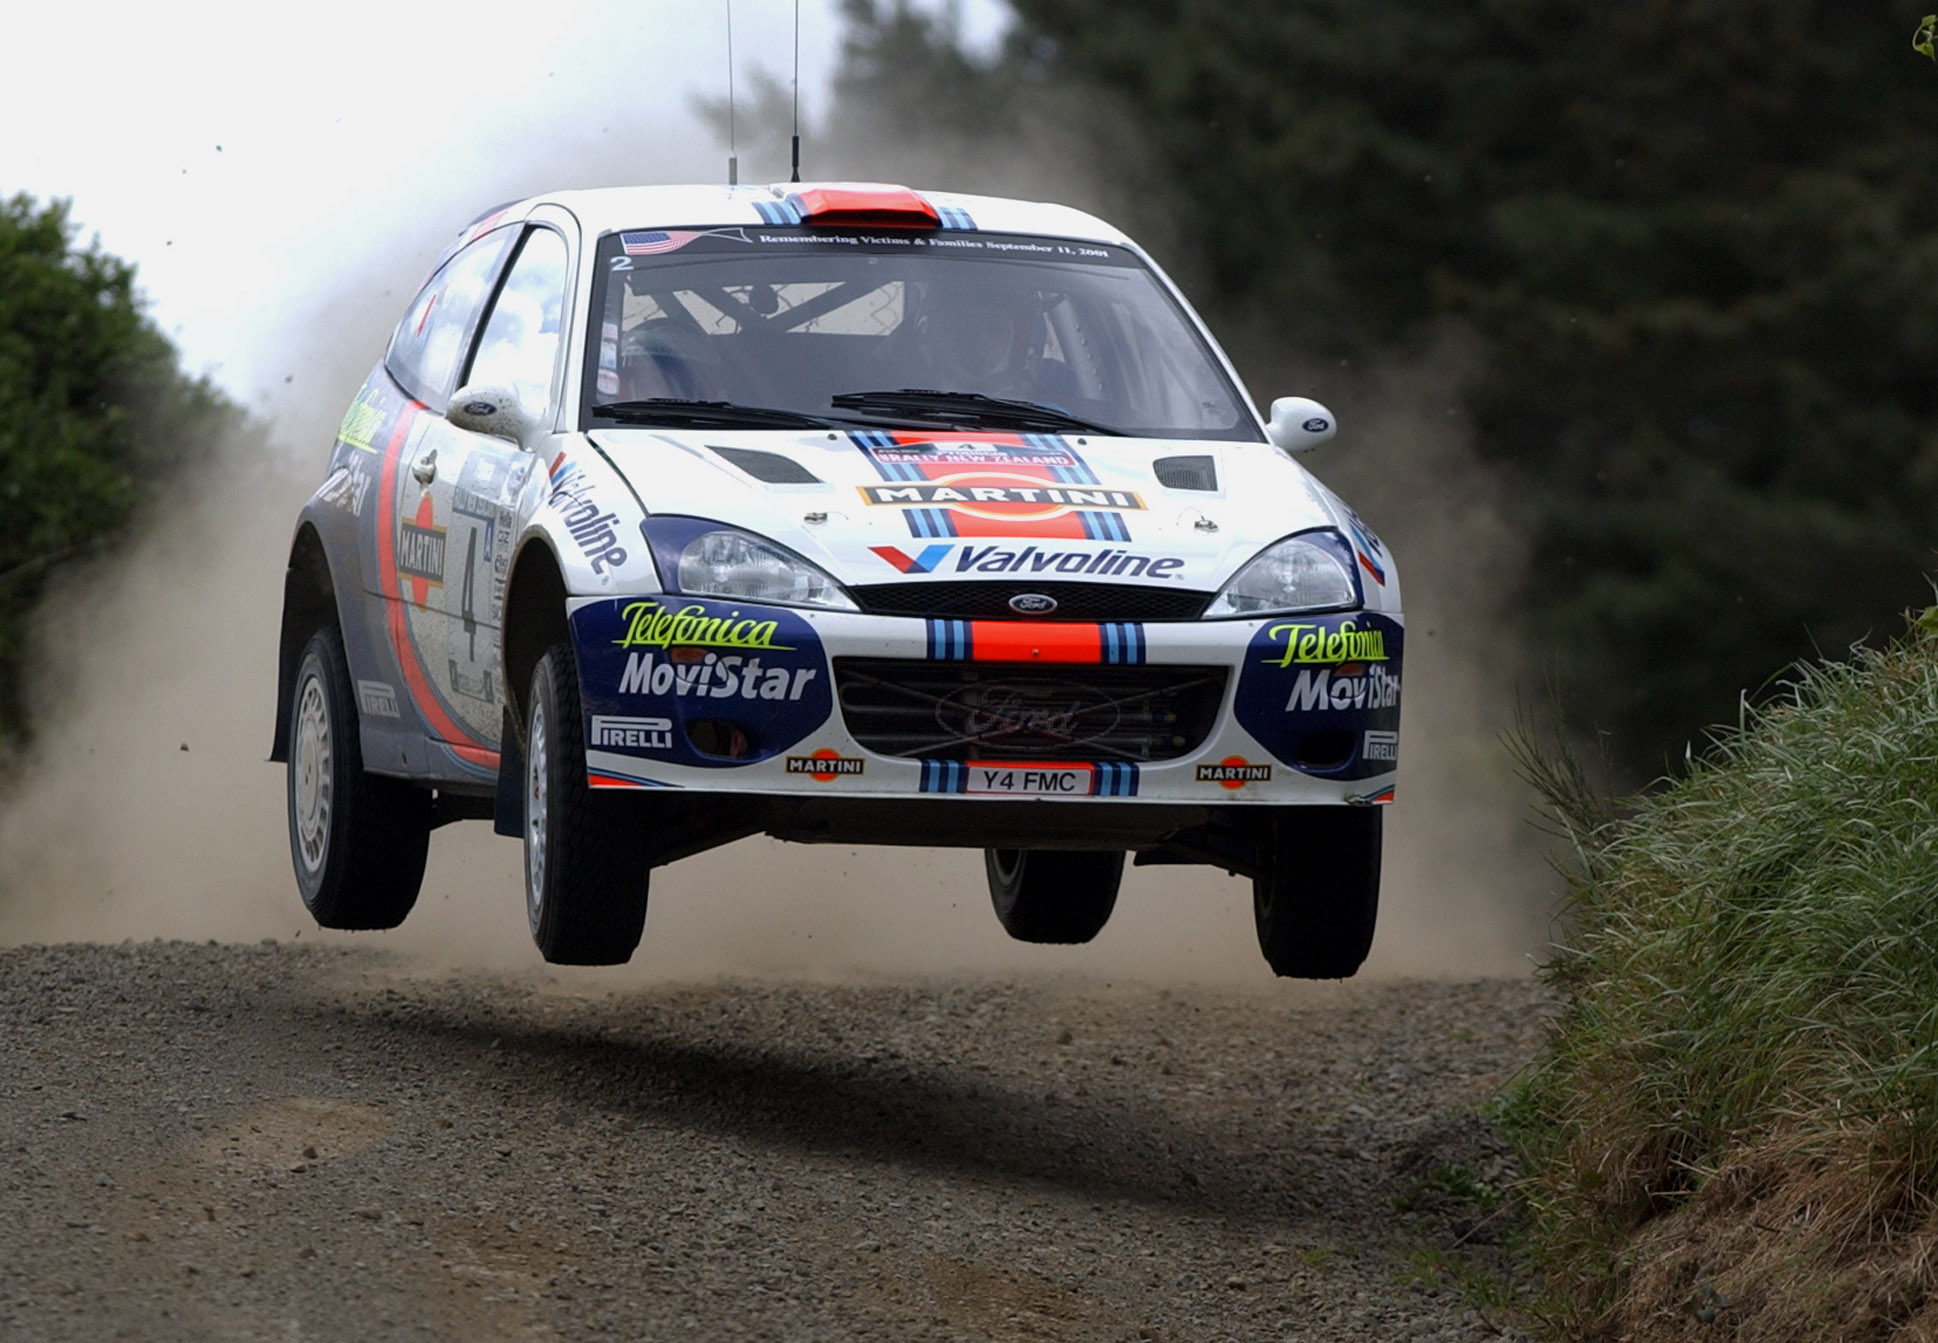 Go onboard with Colin McRae in a throwback to 2001